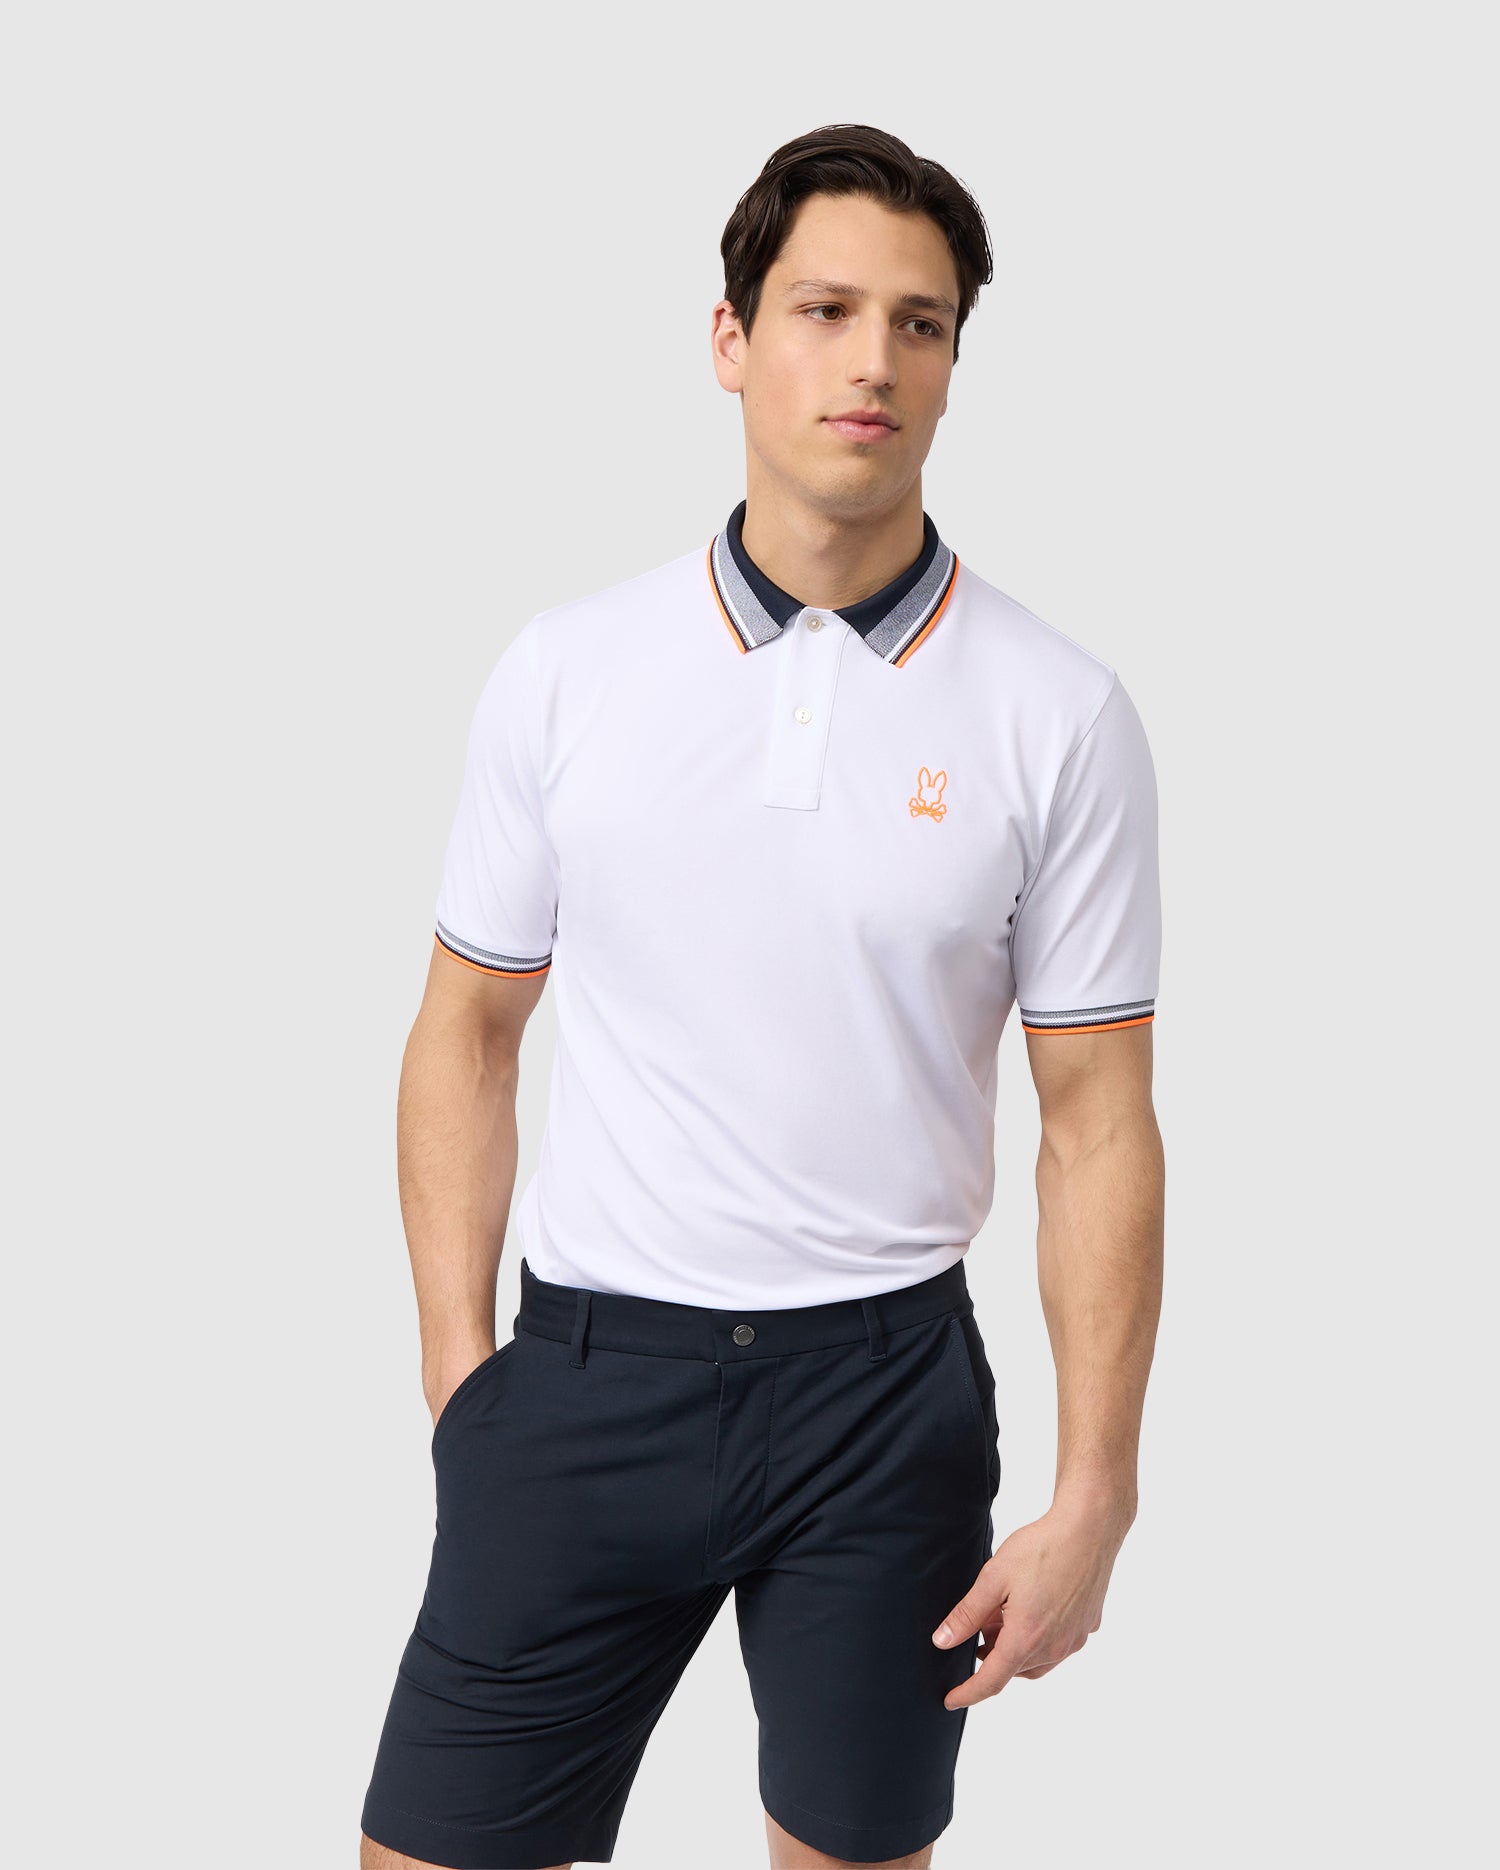 A man with short, dark hair is wearing a white Psycho Bunny MENS PORTLAND SPORT POLO - B6K397B200 featuring orange and black striped accents, an embroidered logo, and breathable mesh for added comfort. He pairs it with dark navy blue shorts. He is standing against a plain white background with one hand in his pocket and a neutral expression.